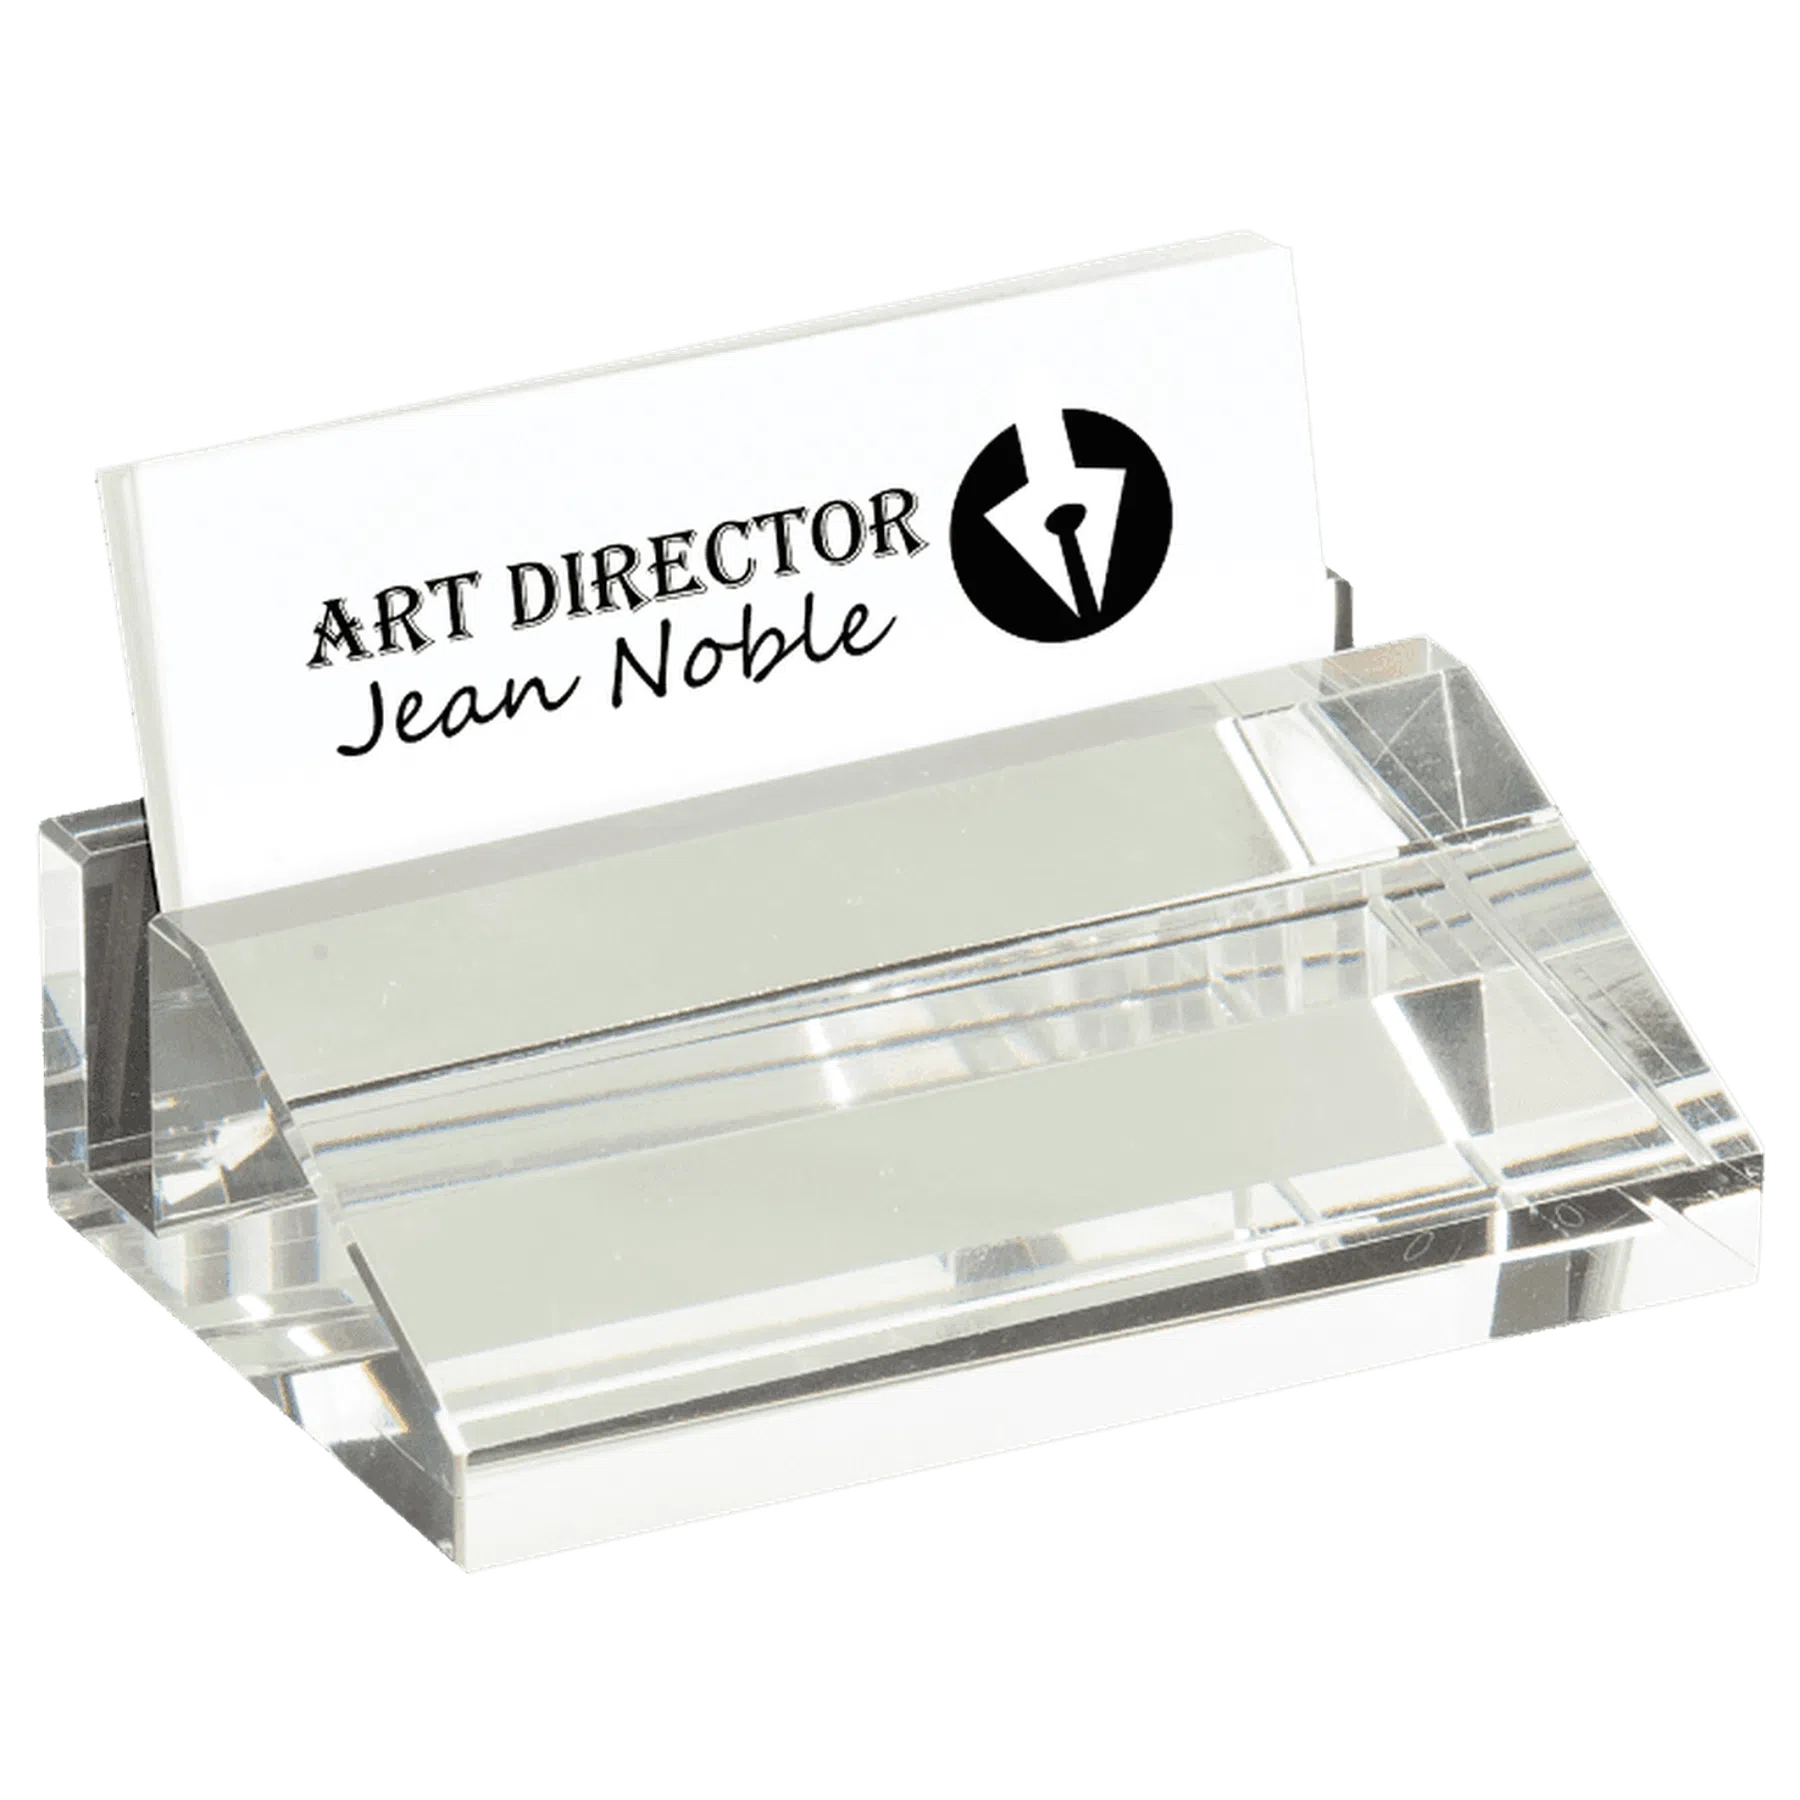 4" x 2 1/2" Personalized Etched Crystal Business Card Holder